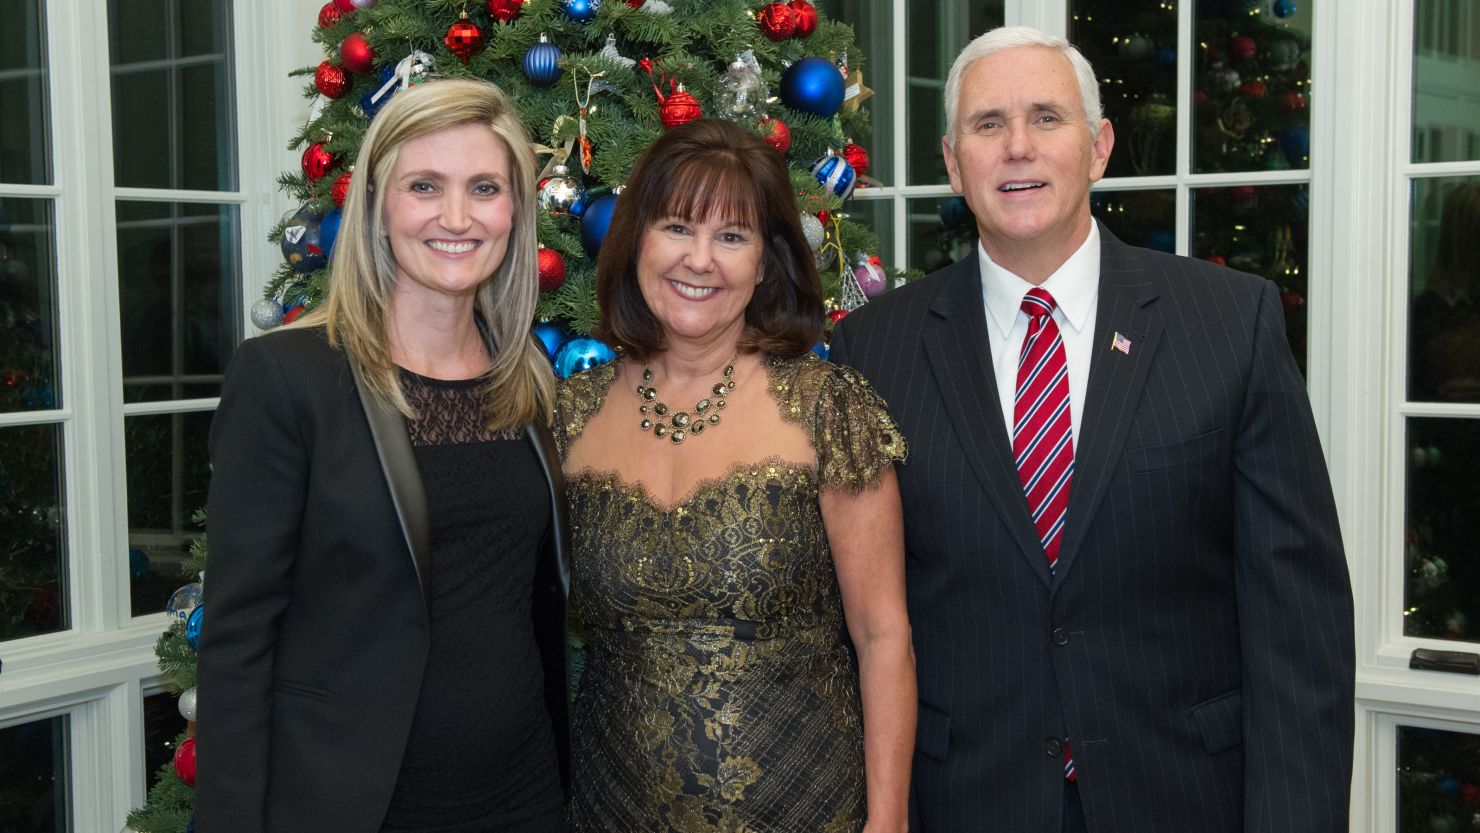 Kristan King Nevins, far left, is leaving the administration this week to head up the office of Rep. Will Hurd, R-Texas. She served as second lady Karen Pence's chief of staff.